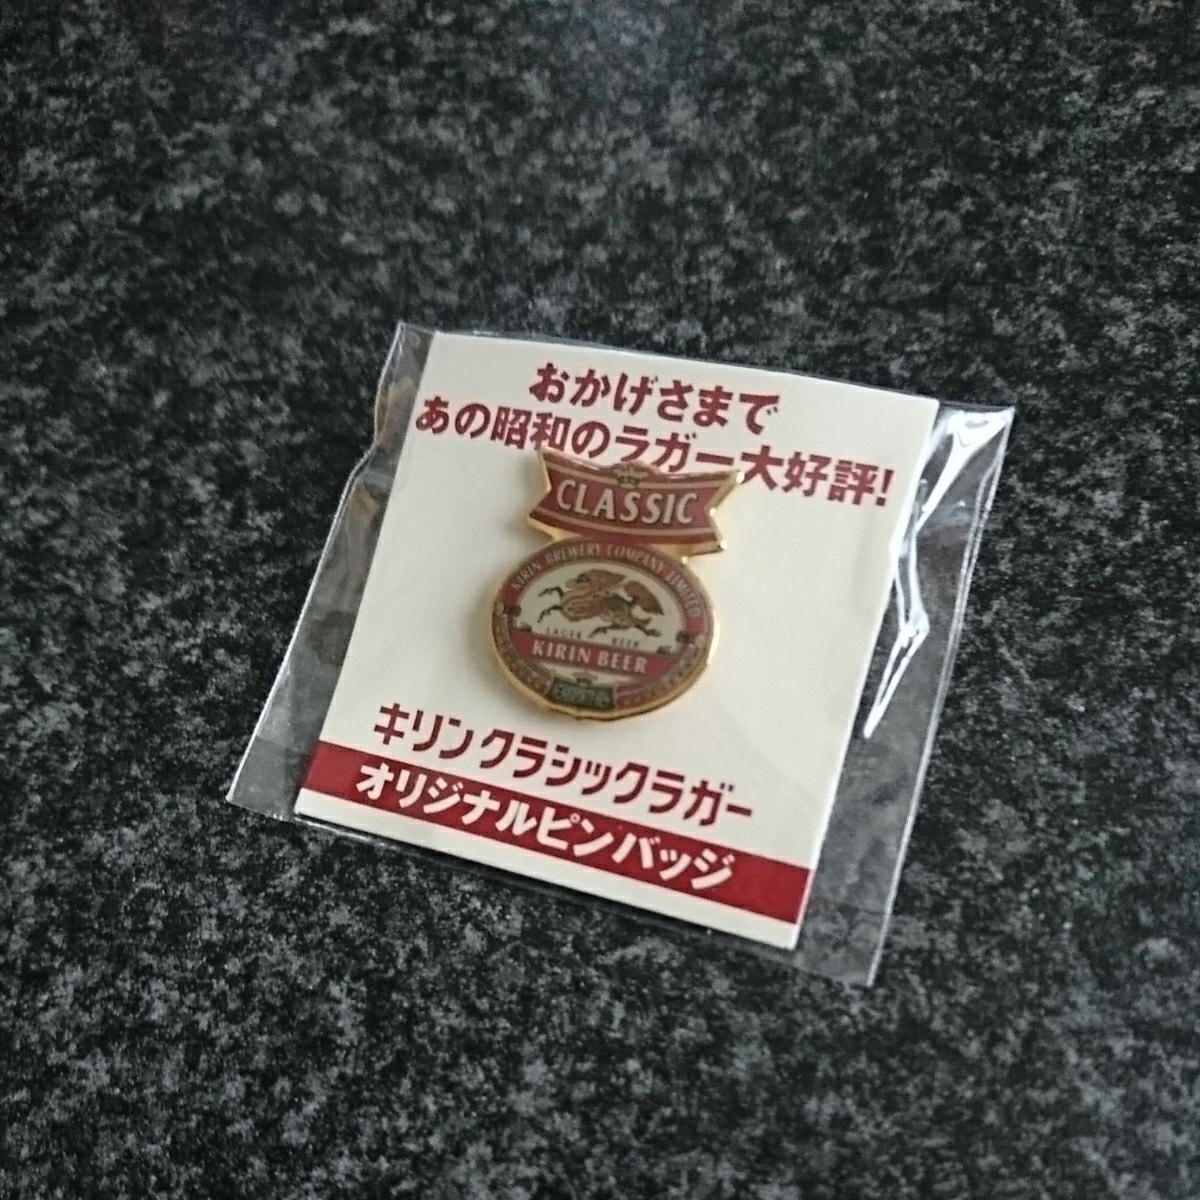  rare!* giraffe beer Classic Rugger [ pin bachi] not for sale KIRIN BEER Showa Retro novelty goods pin badge rare valuable hard-to-find goods 